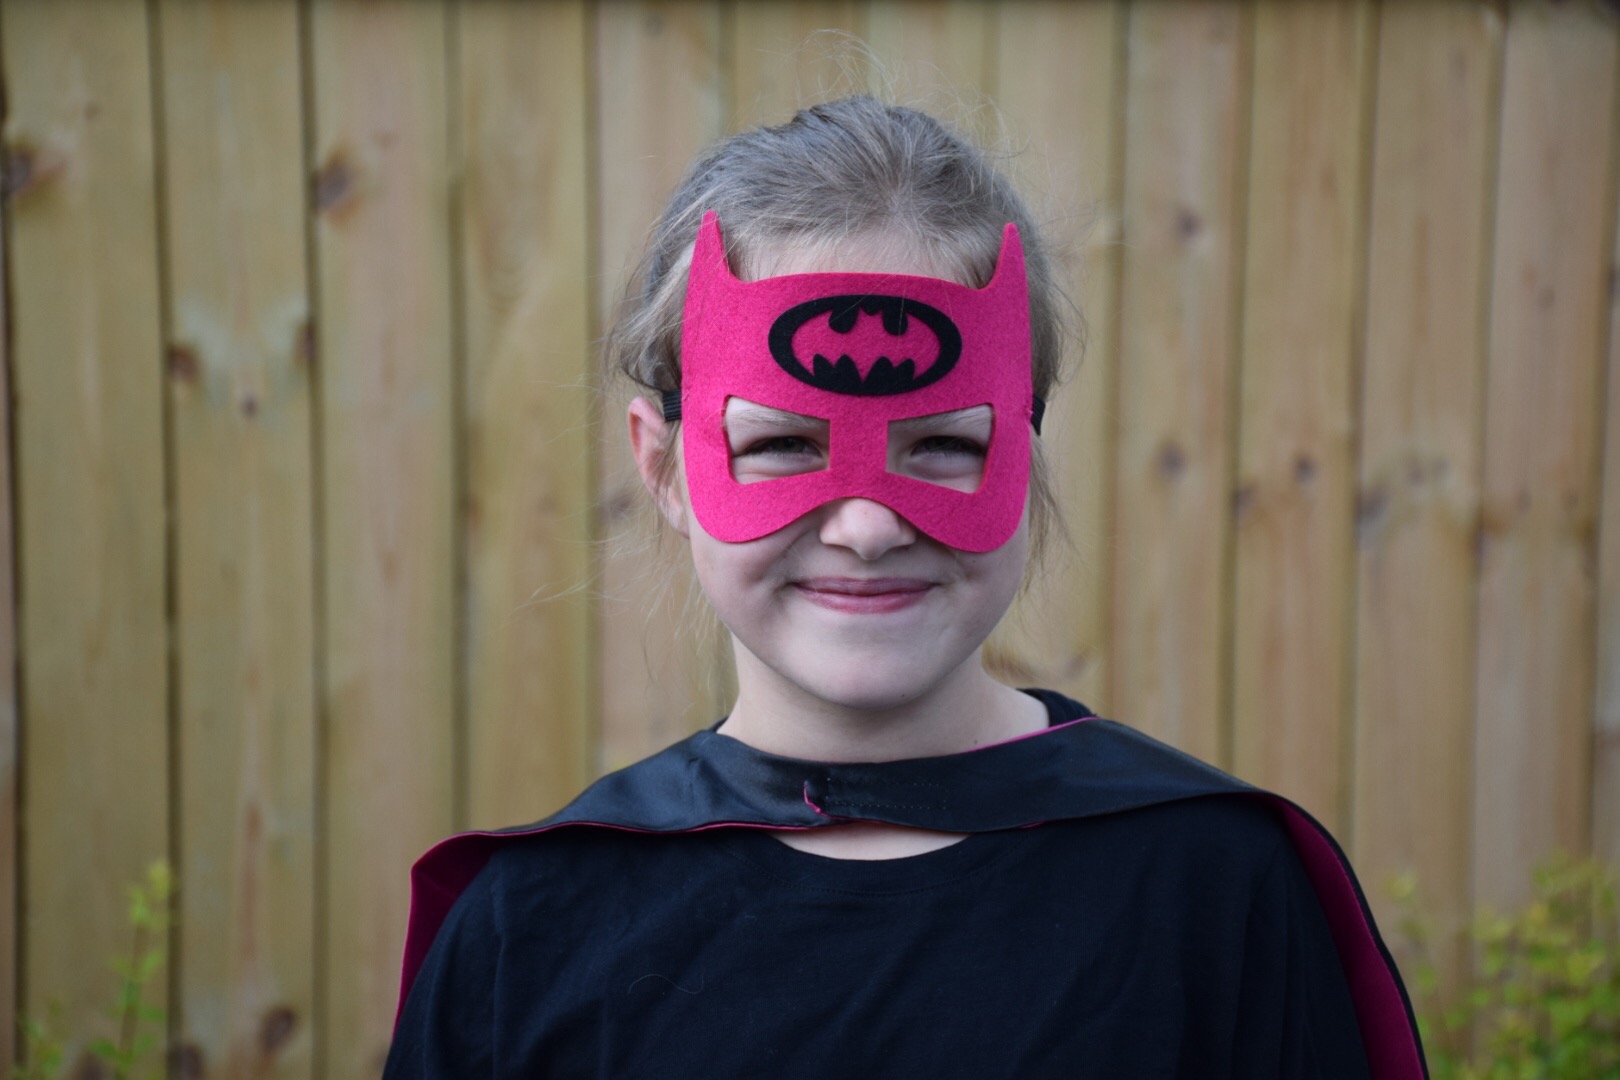 photo by emily reeves dean of her step-daughter wearing a batgirl mask